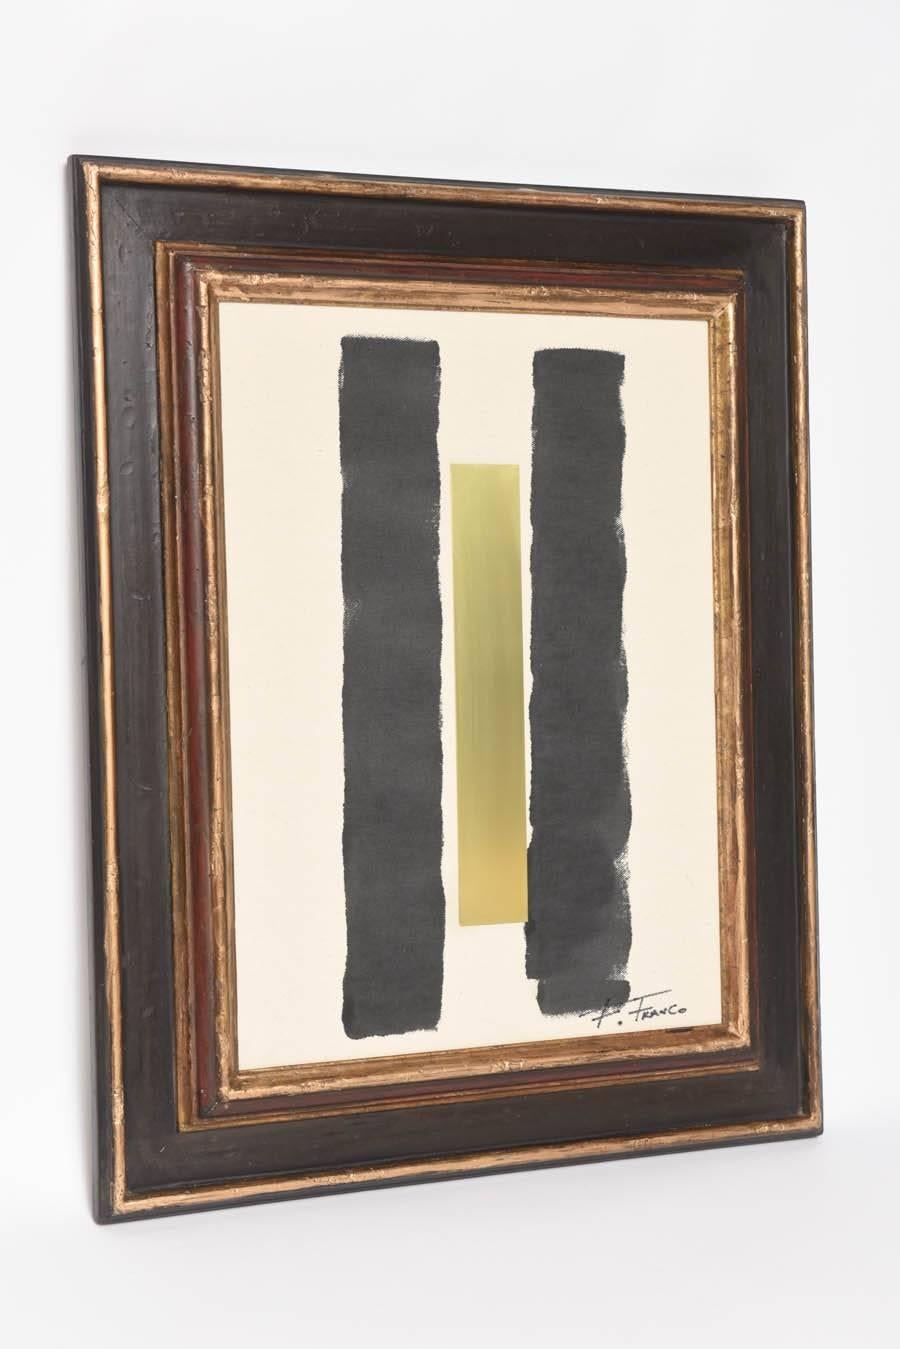 Framed by the artist with an antique frame, this abstract composition is made with brass metal plaque and industrial oil paint on rustic canvas by artist Francisco Franco.

NOTE:  this item will ship from our MIAMI showroom.